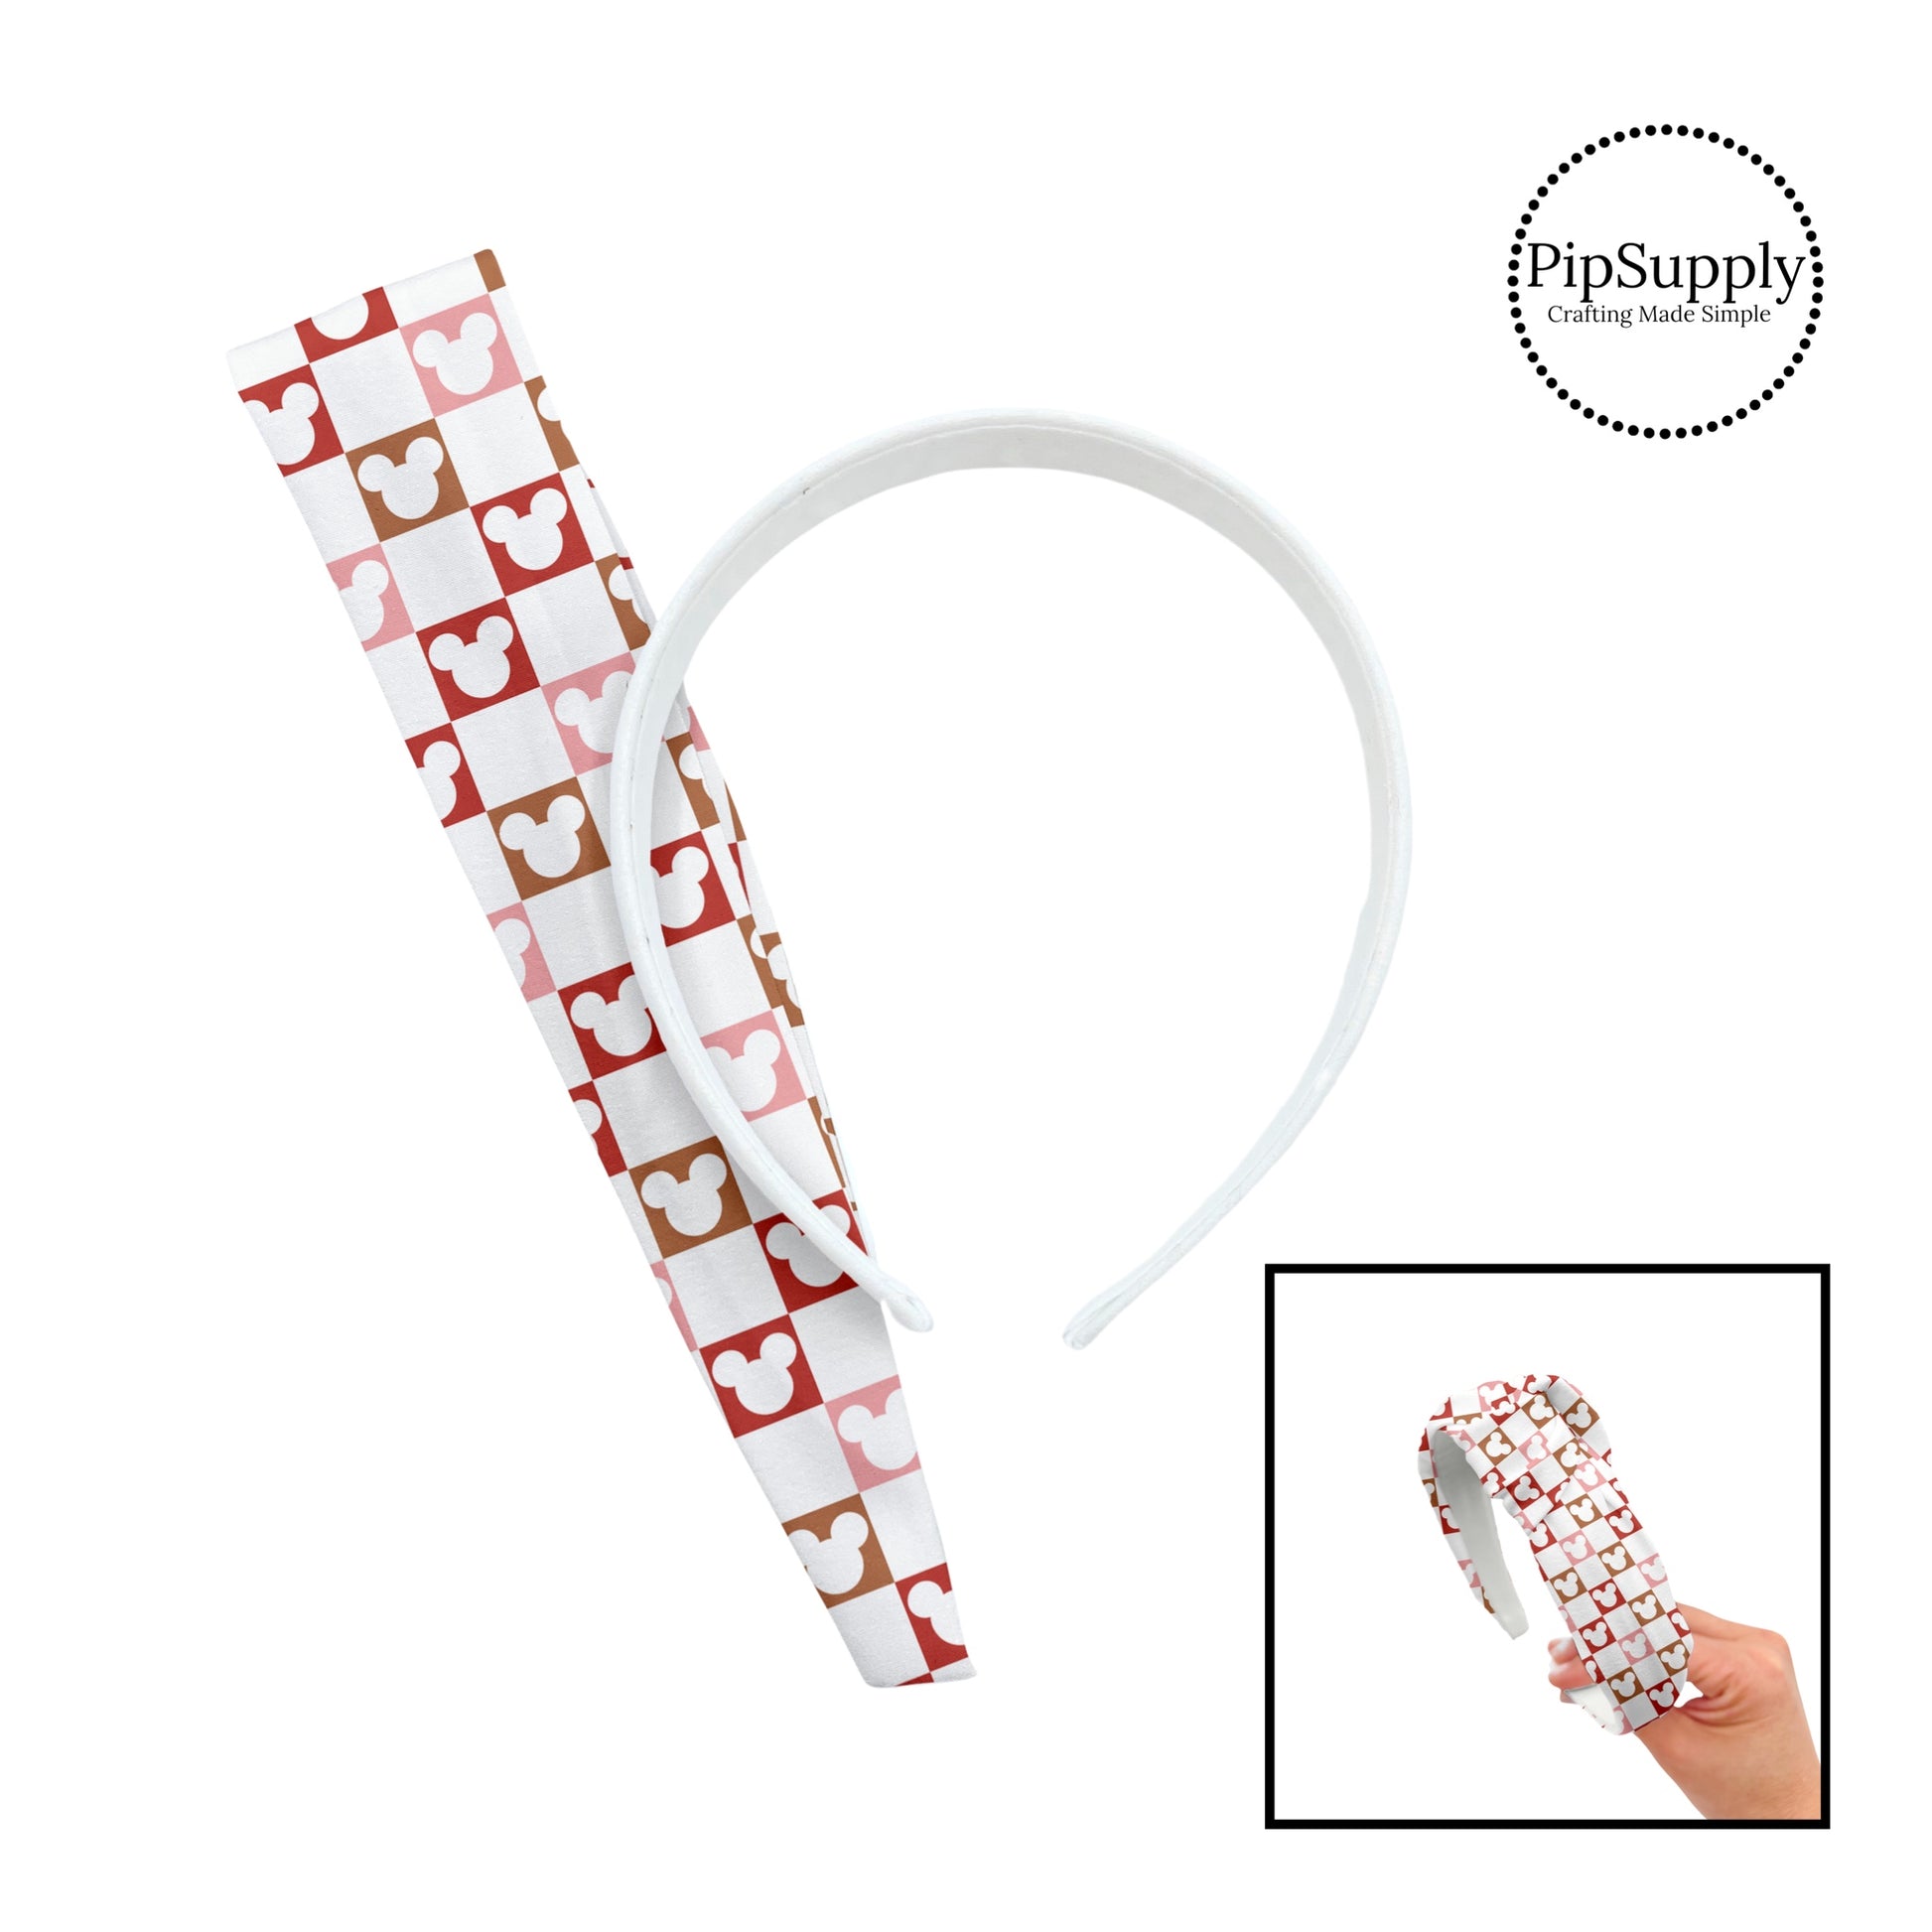 Brown, red, and pink mouse cutouts on white checkered knotted headband kit